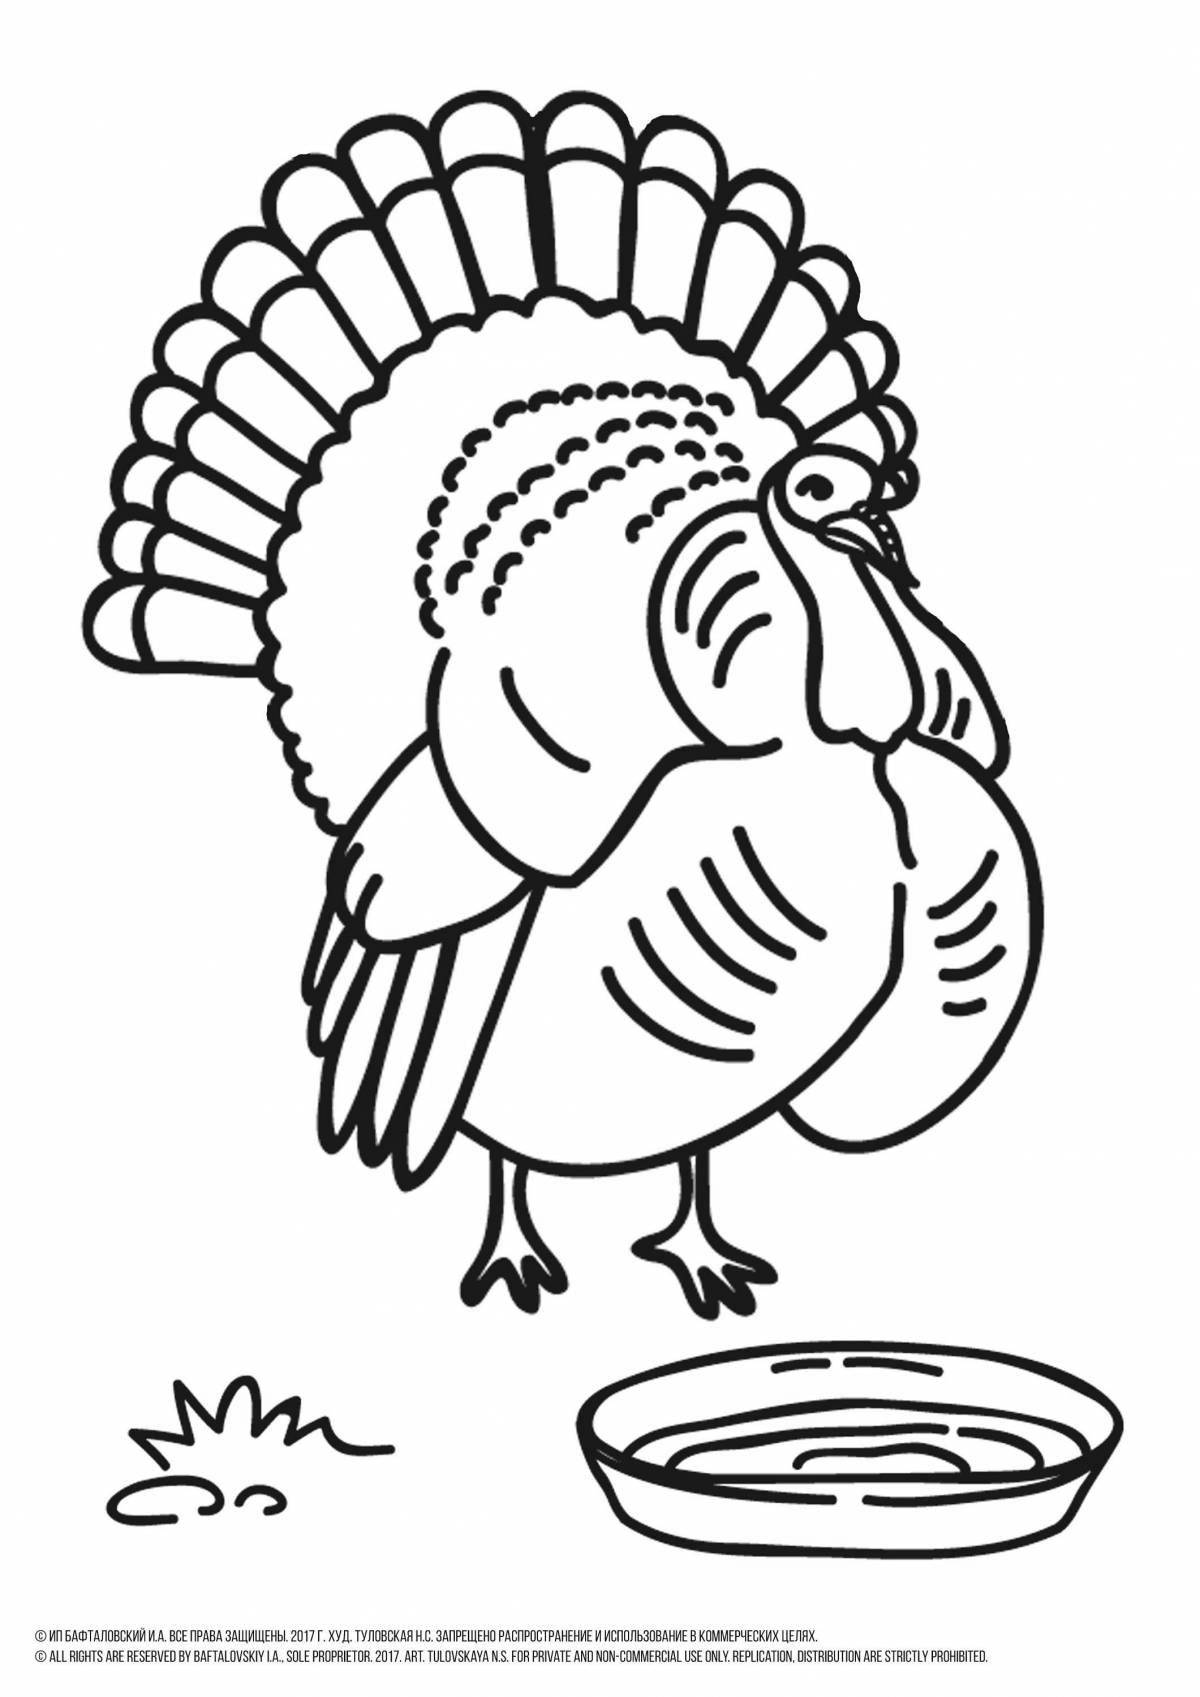 Delightful turkey coloring book for kids